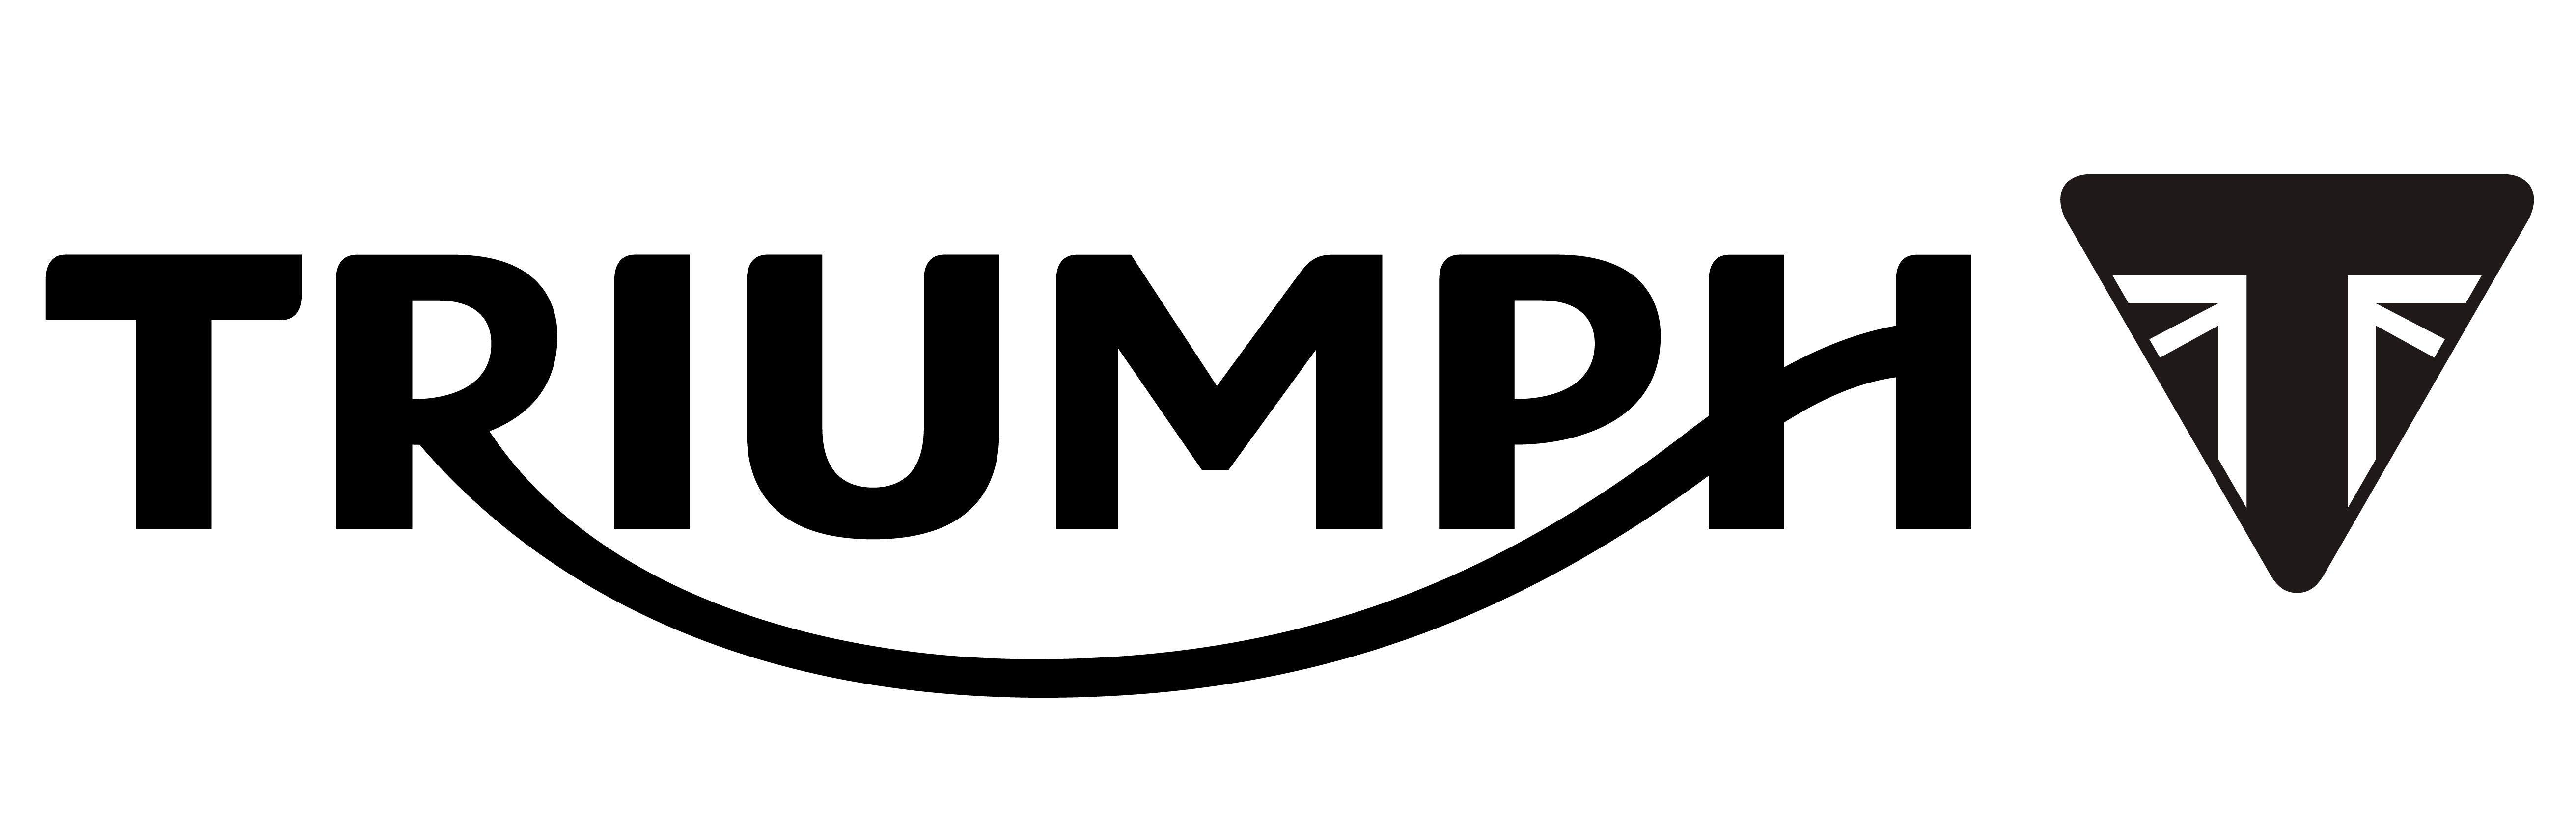 Triumph Motorcycle Logo - Triumph Motorcycles Offers: Free Accessories & More | BikeDekho